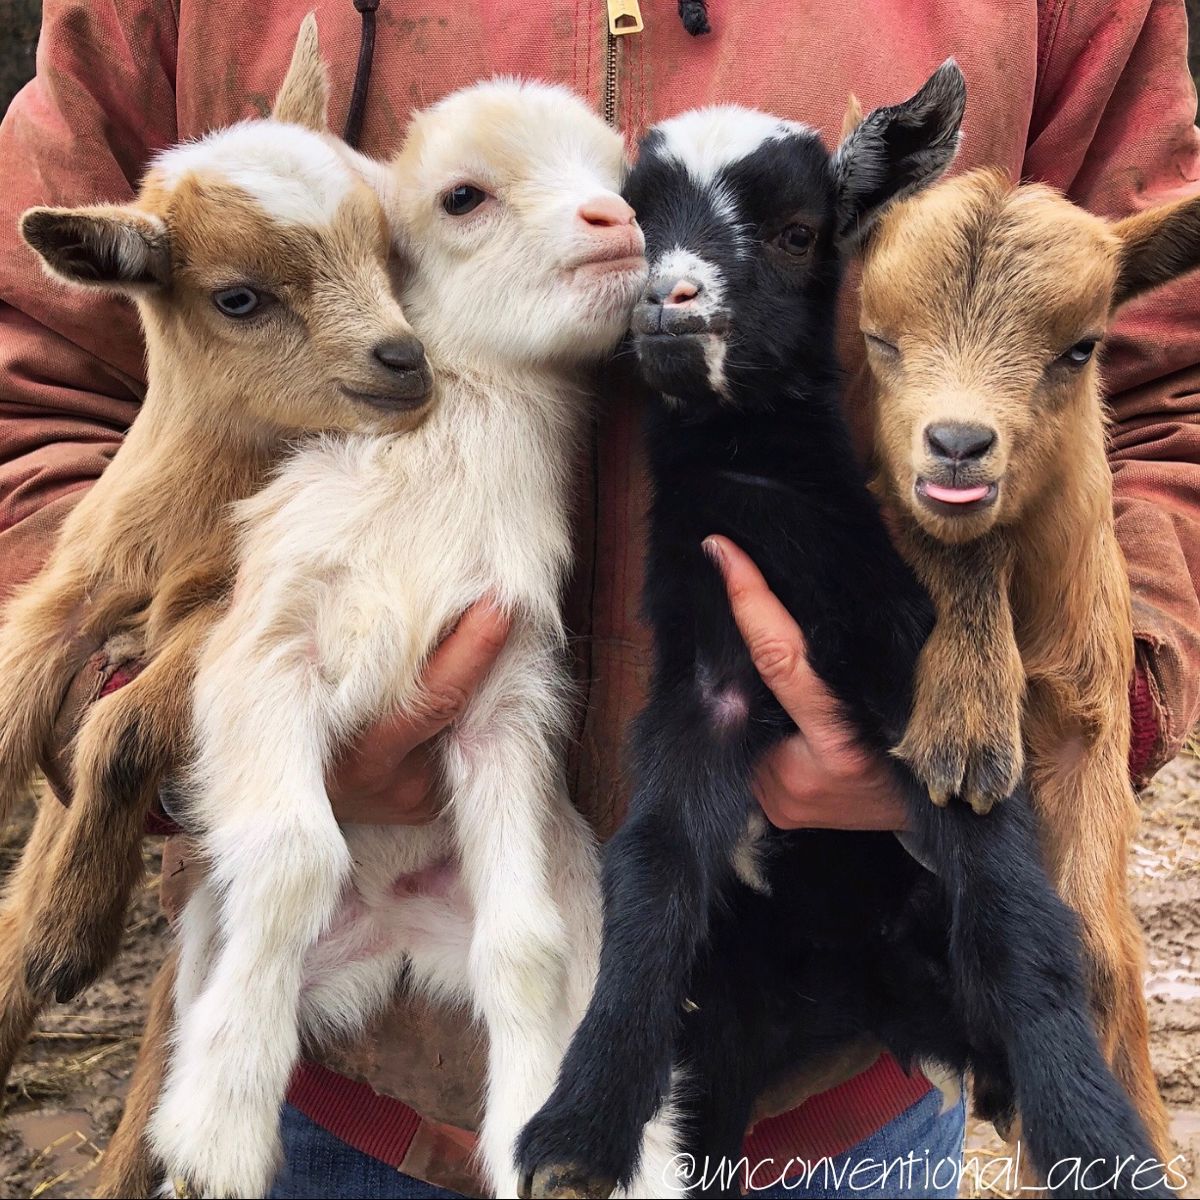 a person holding four baby goats in their arms.